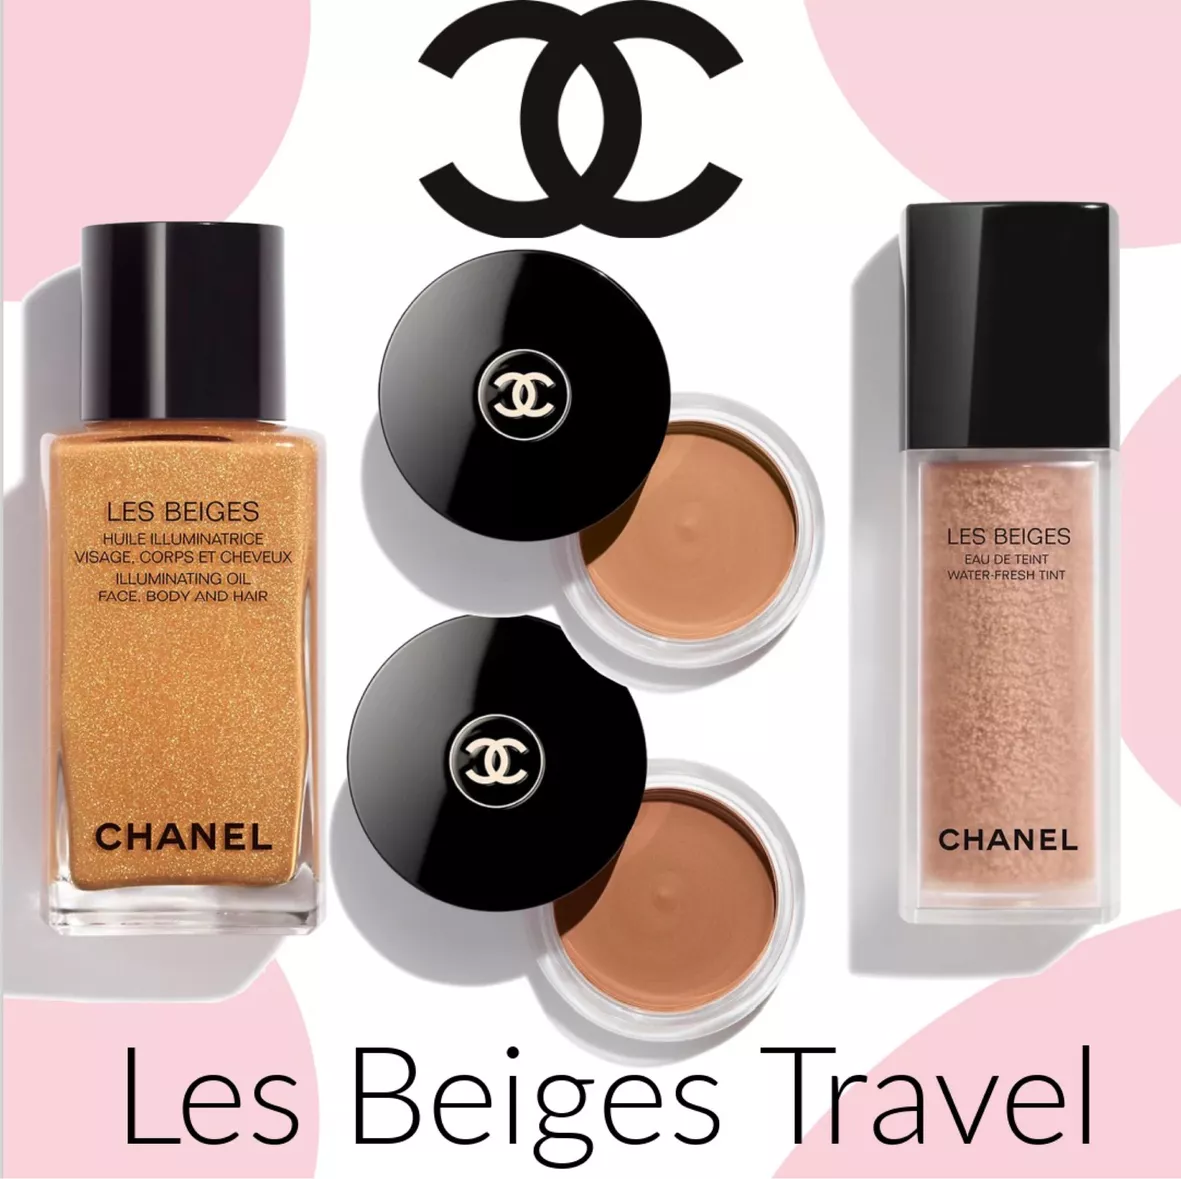 Re: Chanel Updates - Page 36 - Beauty Insider Community